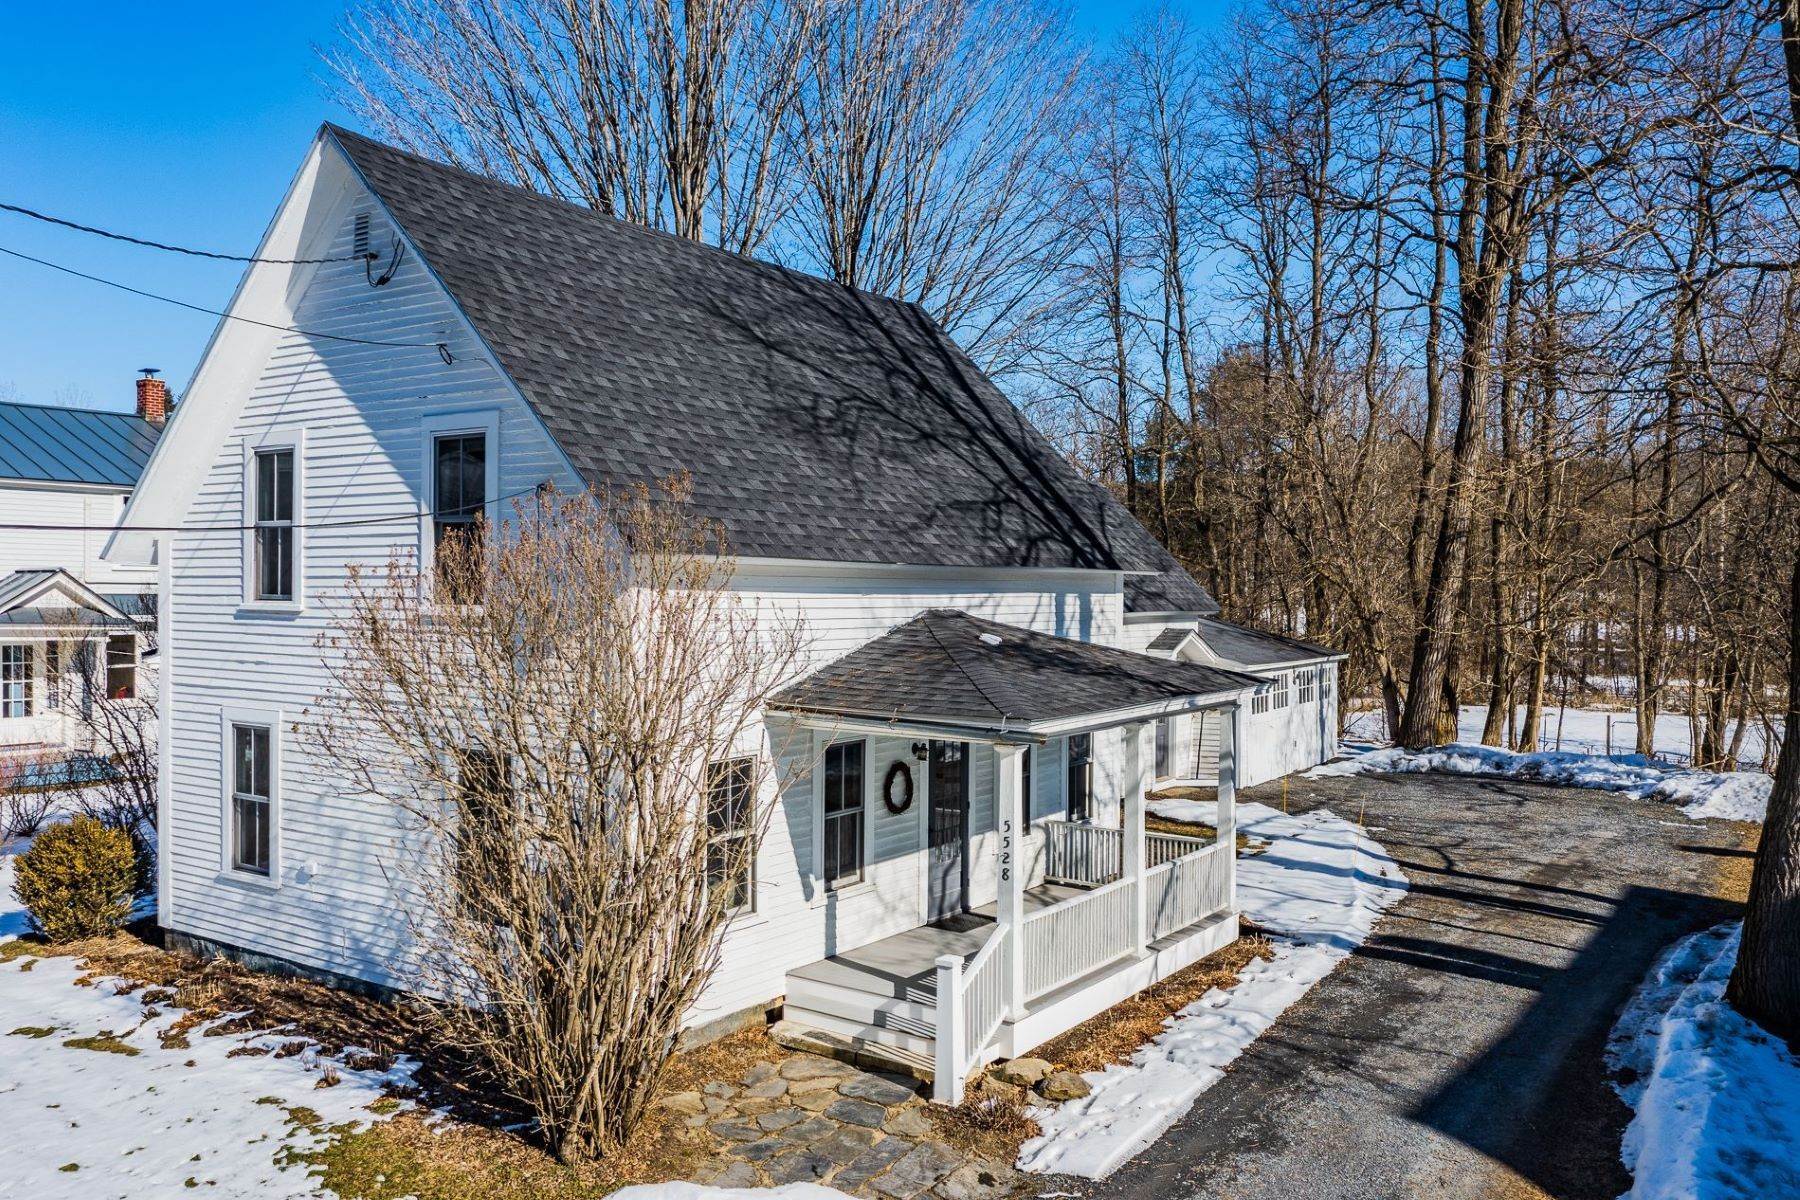 Property for Sale at Three Bedroom Cape in Thetford 5528 Vt Route 5, Thetford, VT 05054